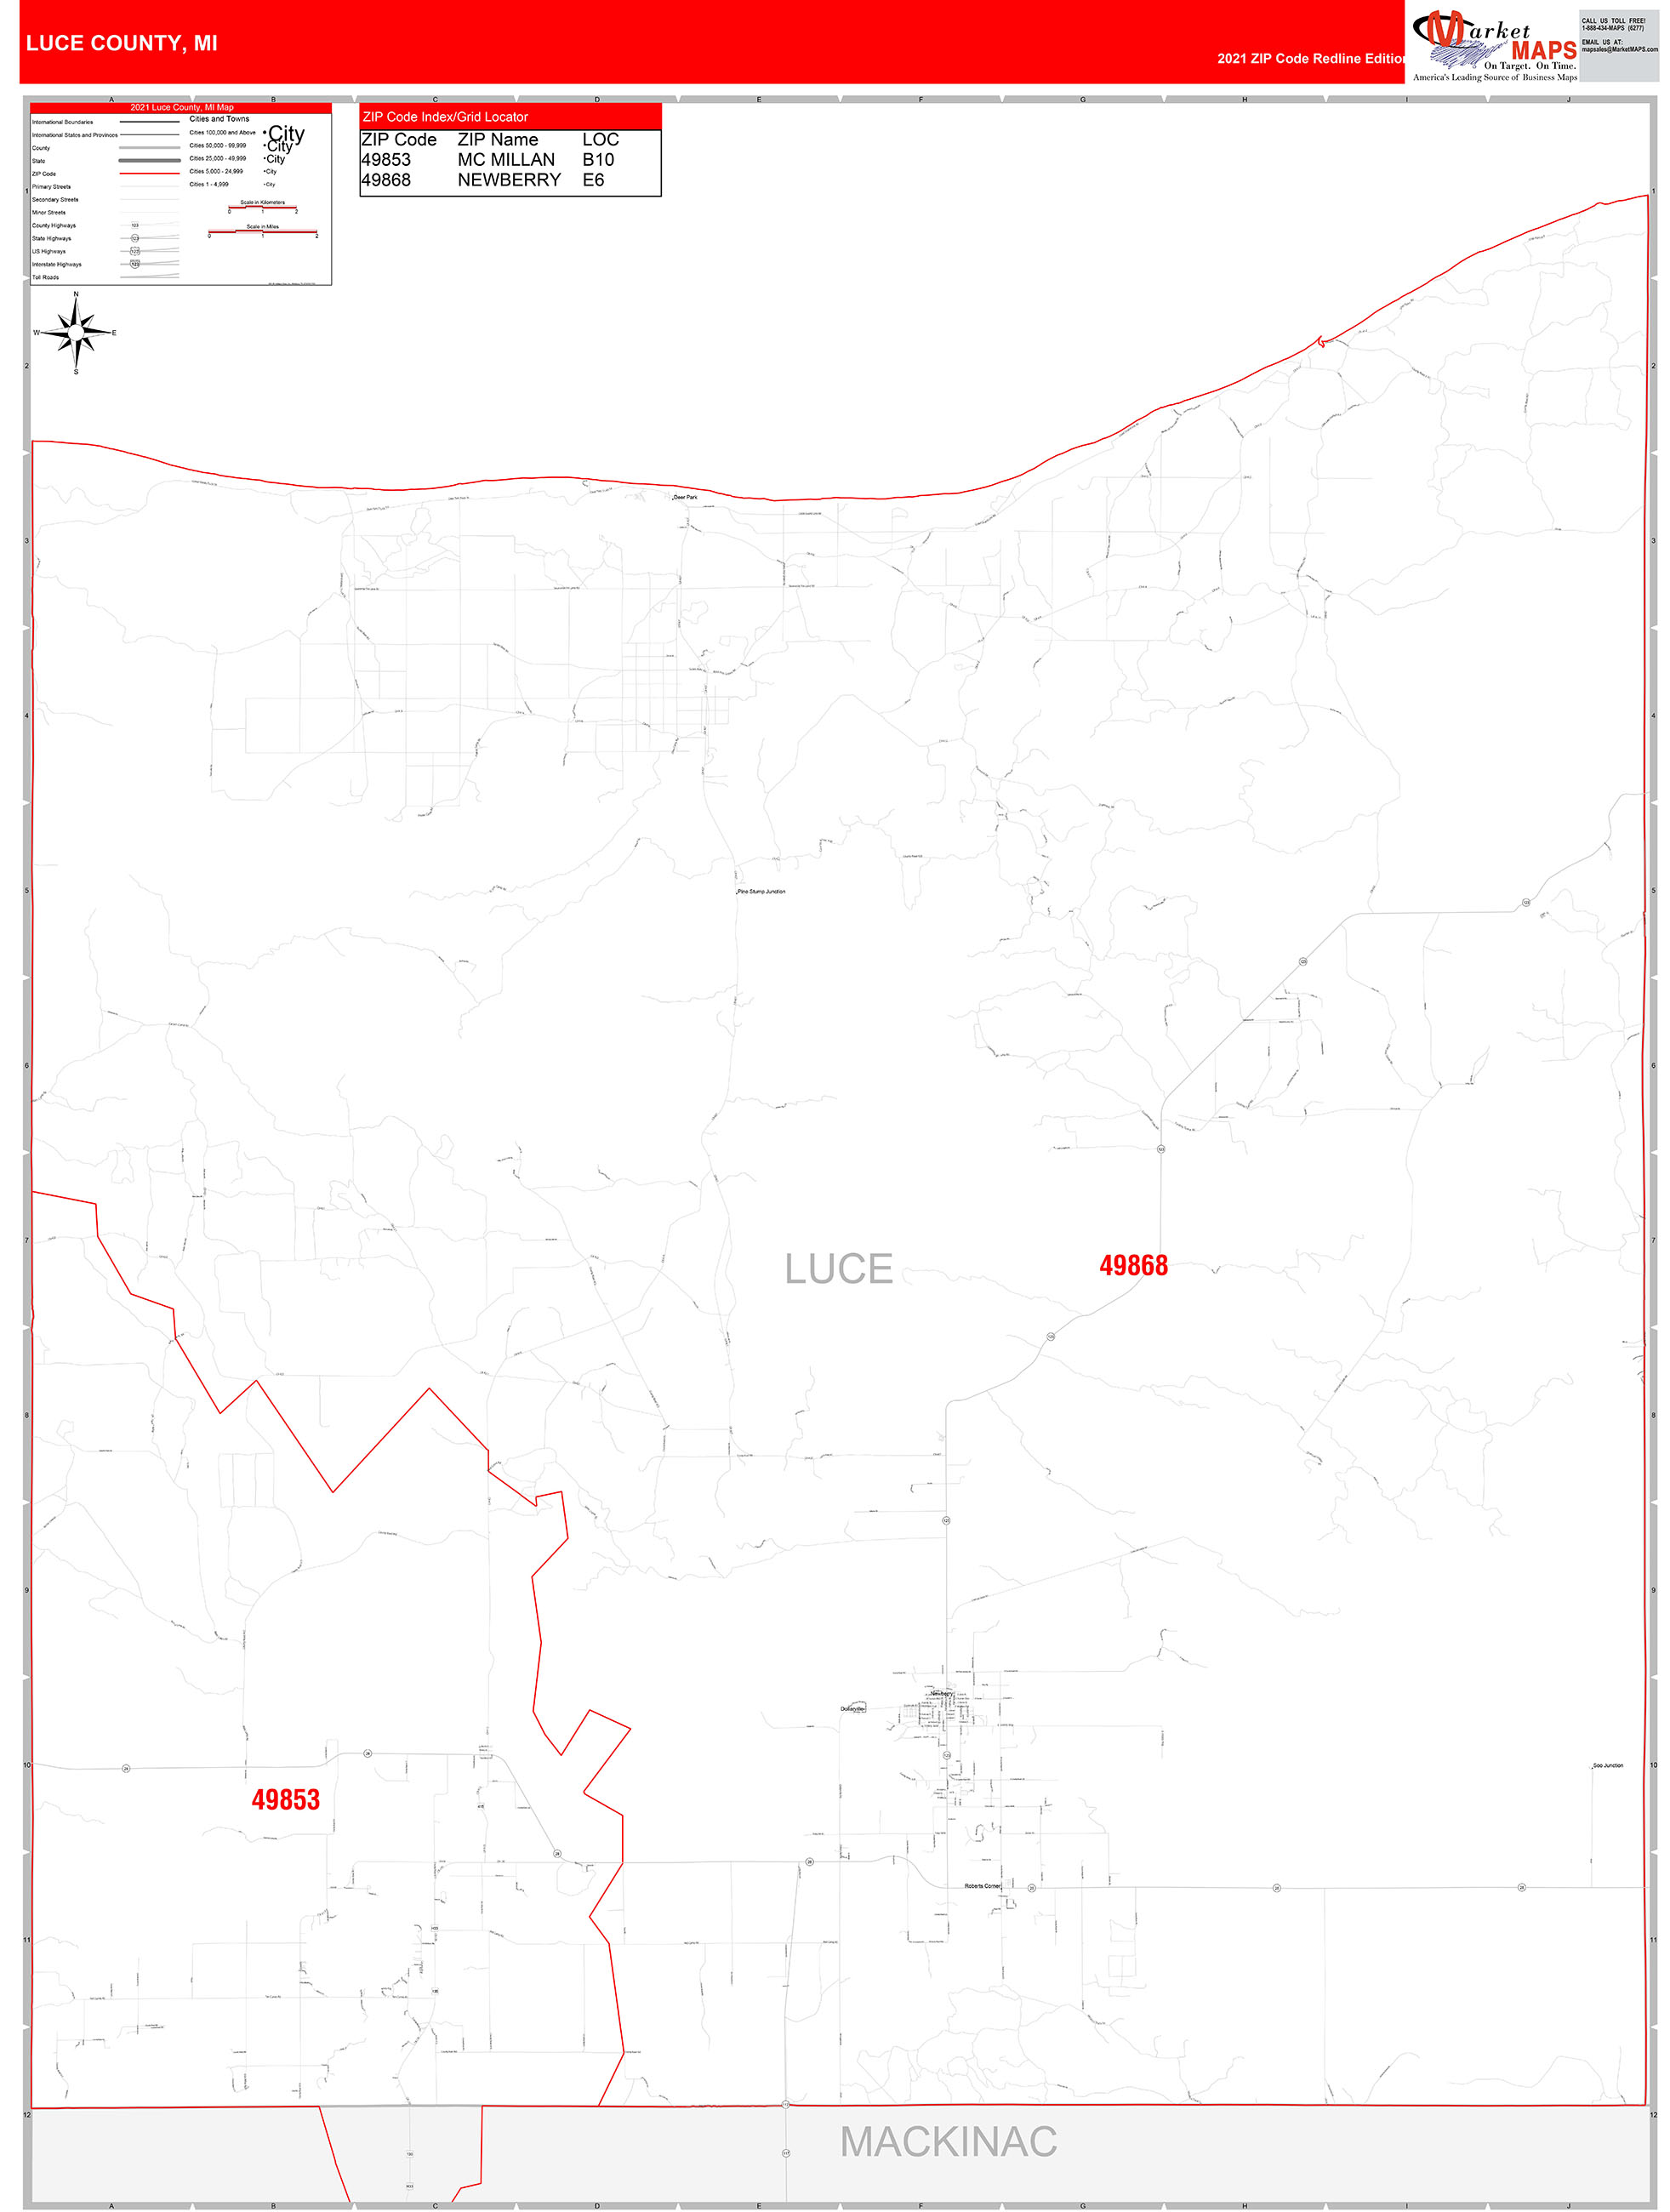 Luce County Mi Zip Code Wall Map Red Line Style By Marketmaps 9090